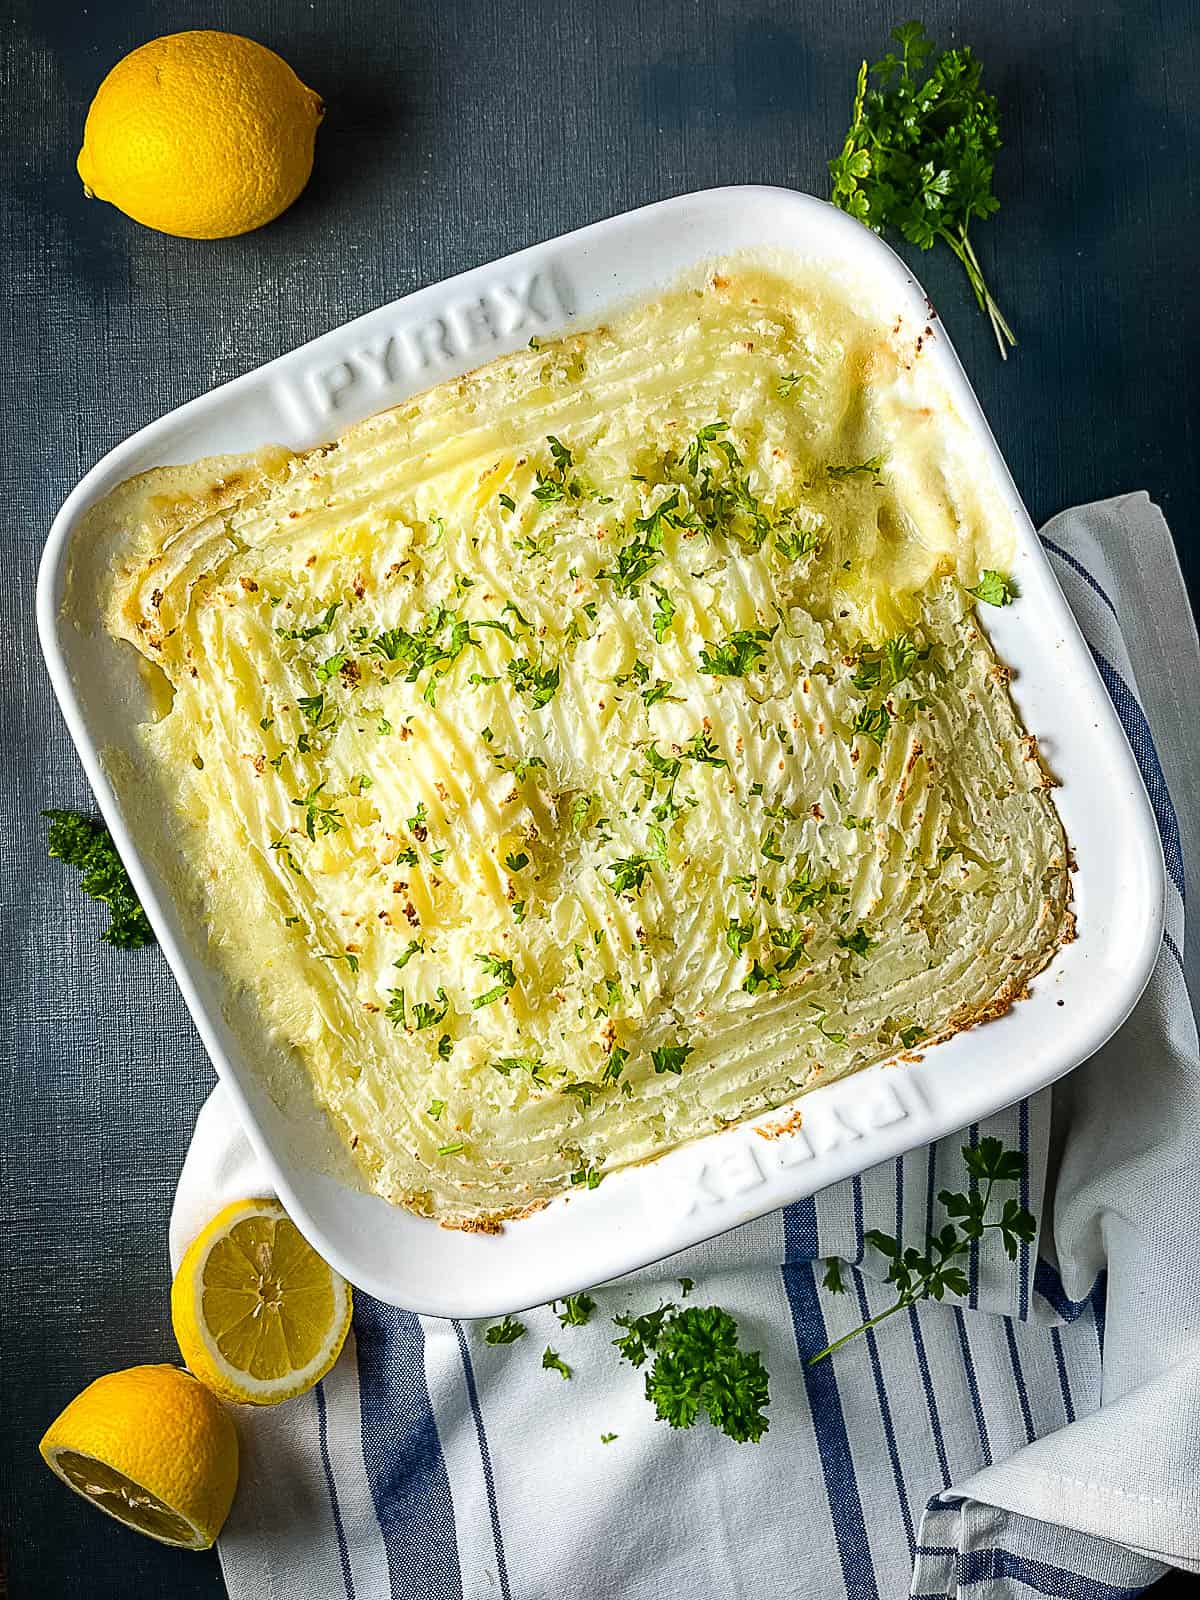 oven baked fish pie with leeks topped with fresh parsley